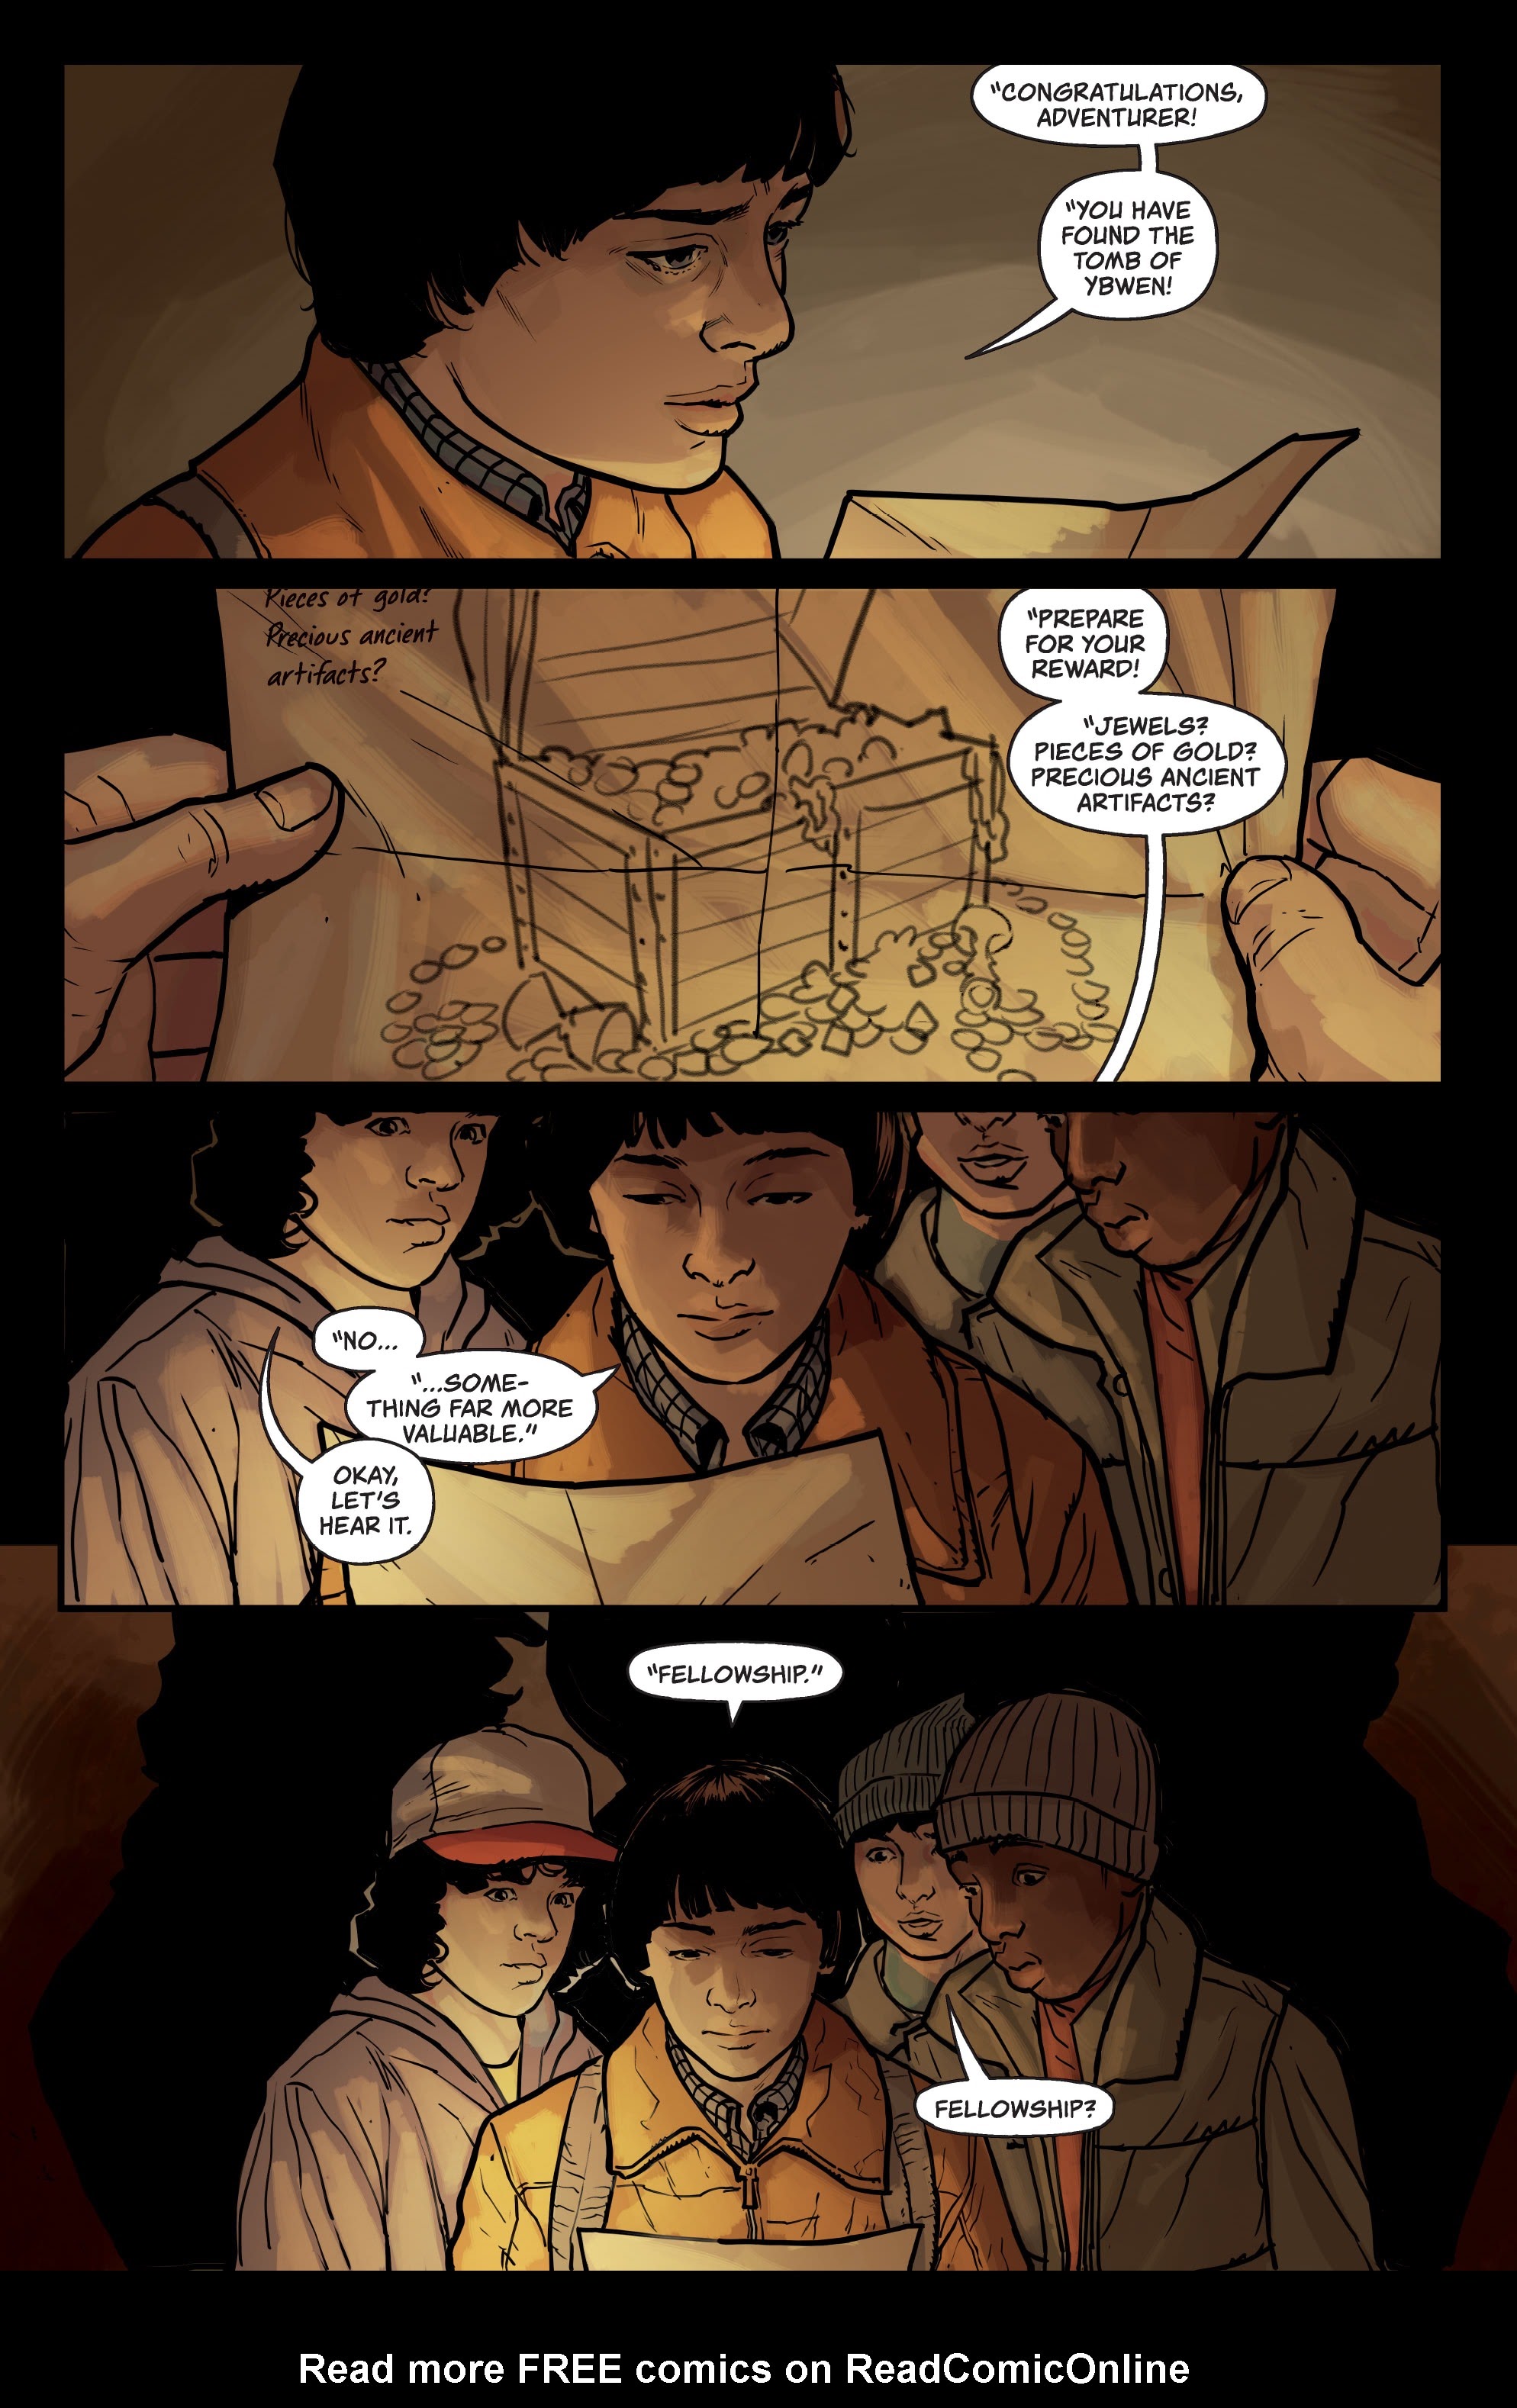 Read online Stranger Things: The Tomb of Ybwen comic -  Issue #4 - 4